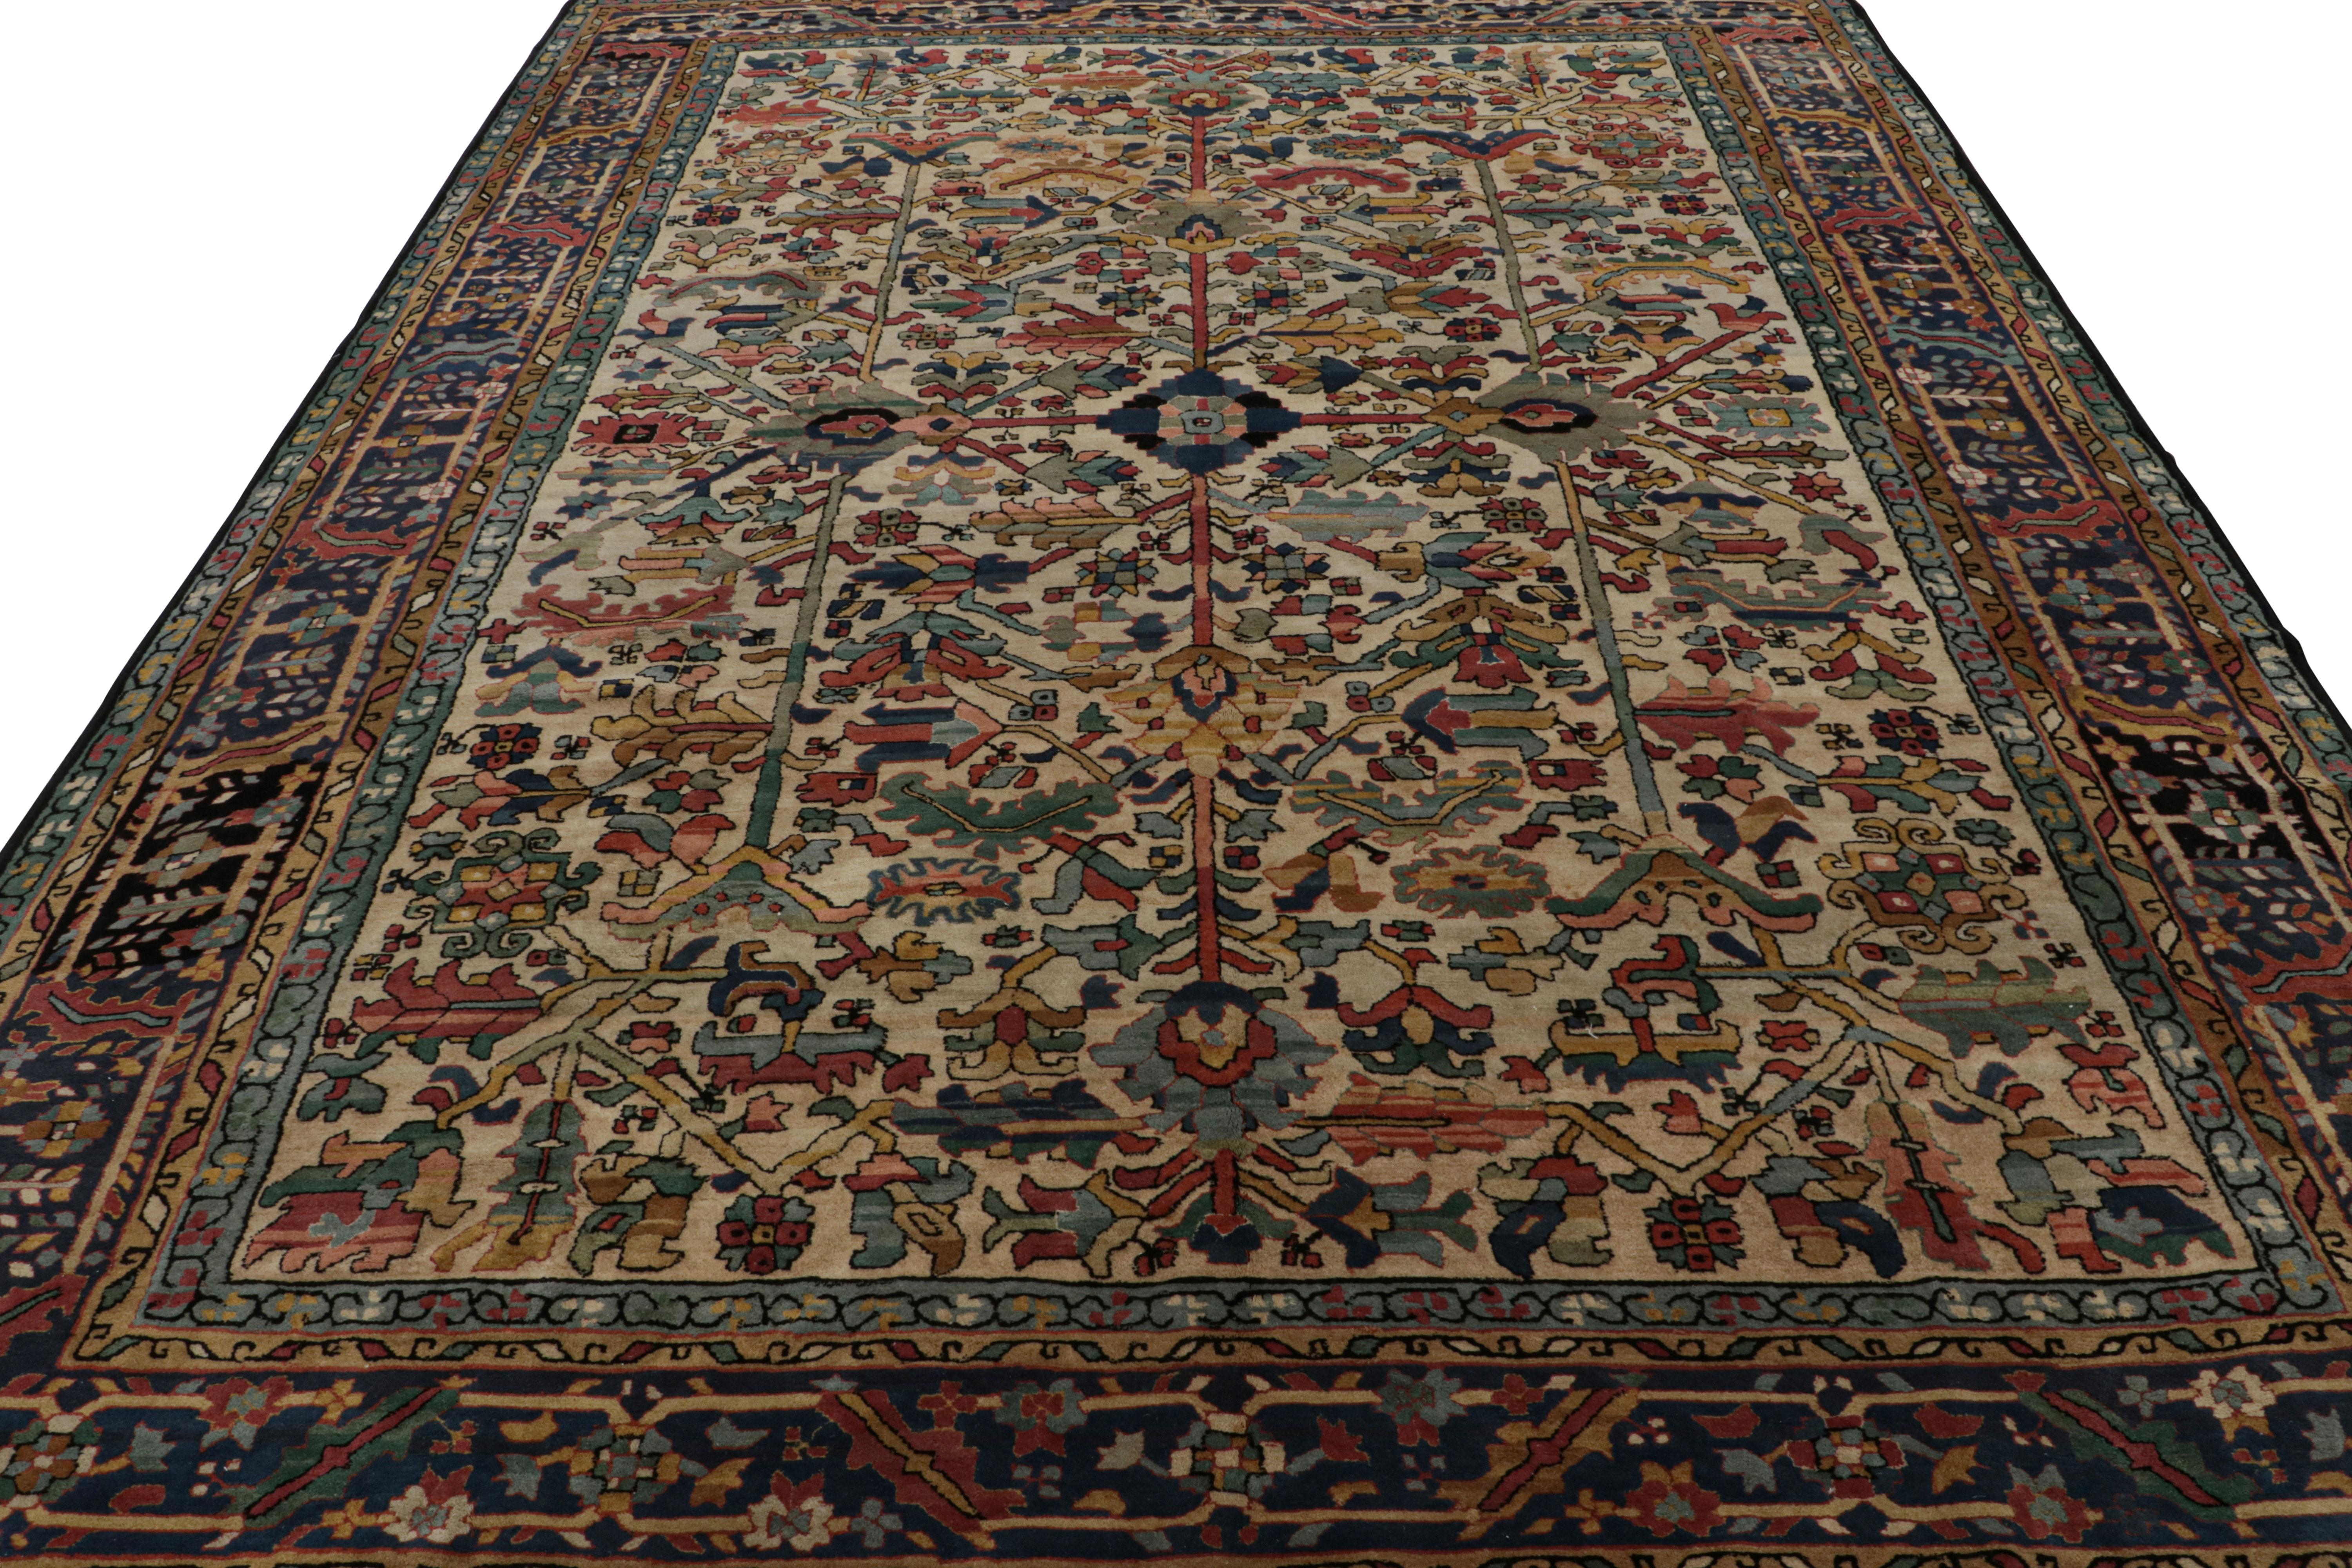 German intage European Rug in Polychromatic Geometric Patterns, from Rug & Kilim For Sale